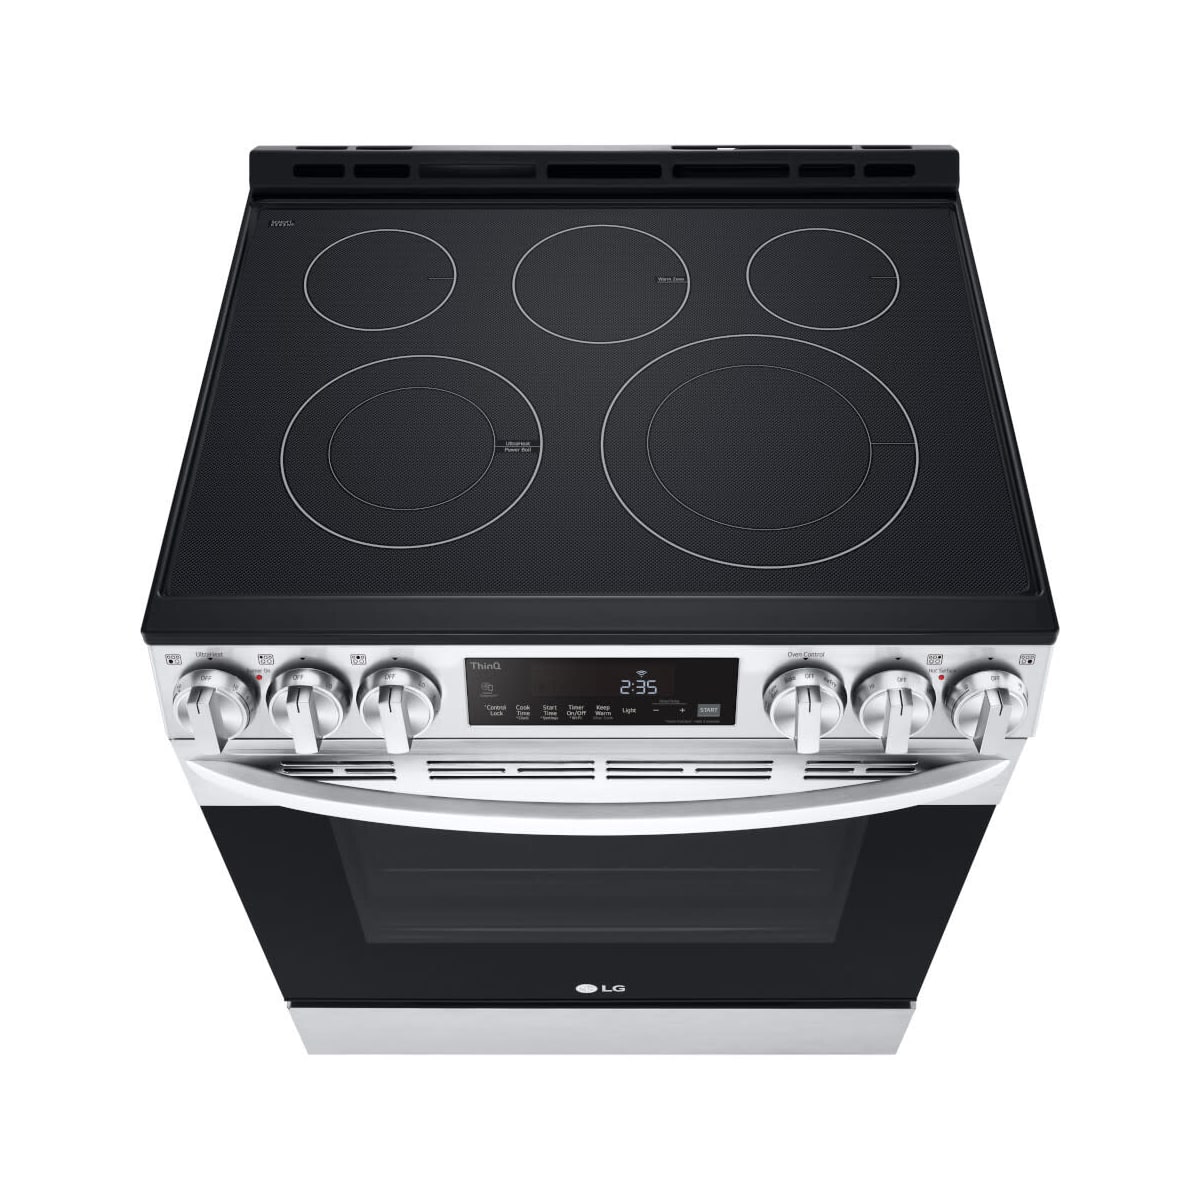 LG Range with Air Fry - Introducing the Air Fry Cooking Mode 